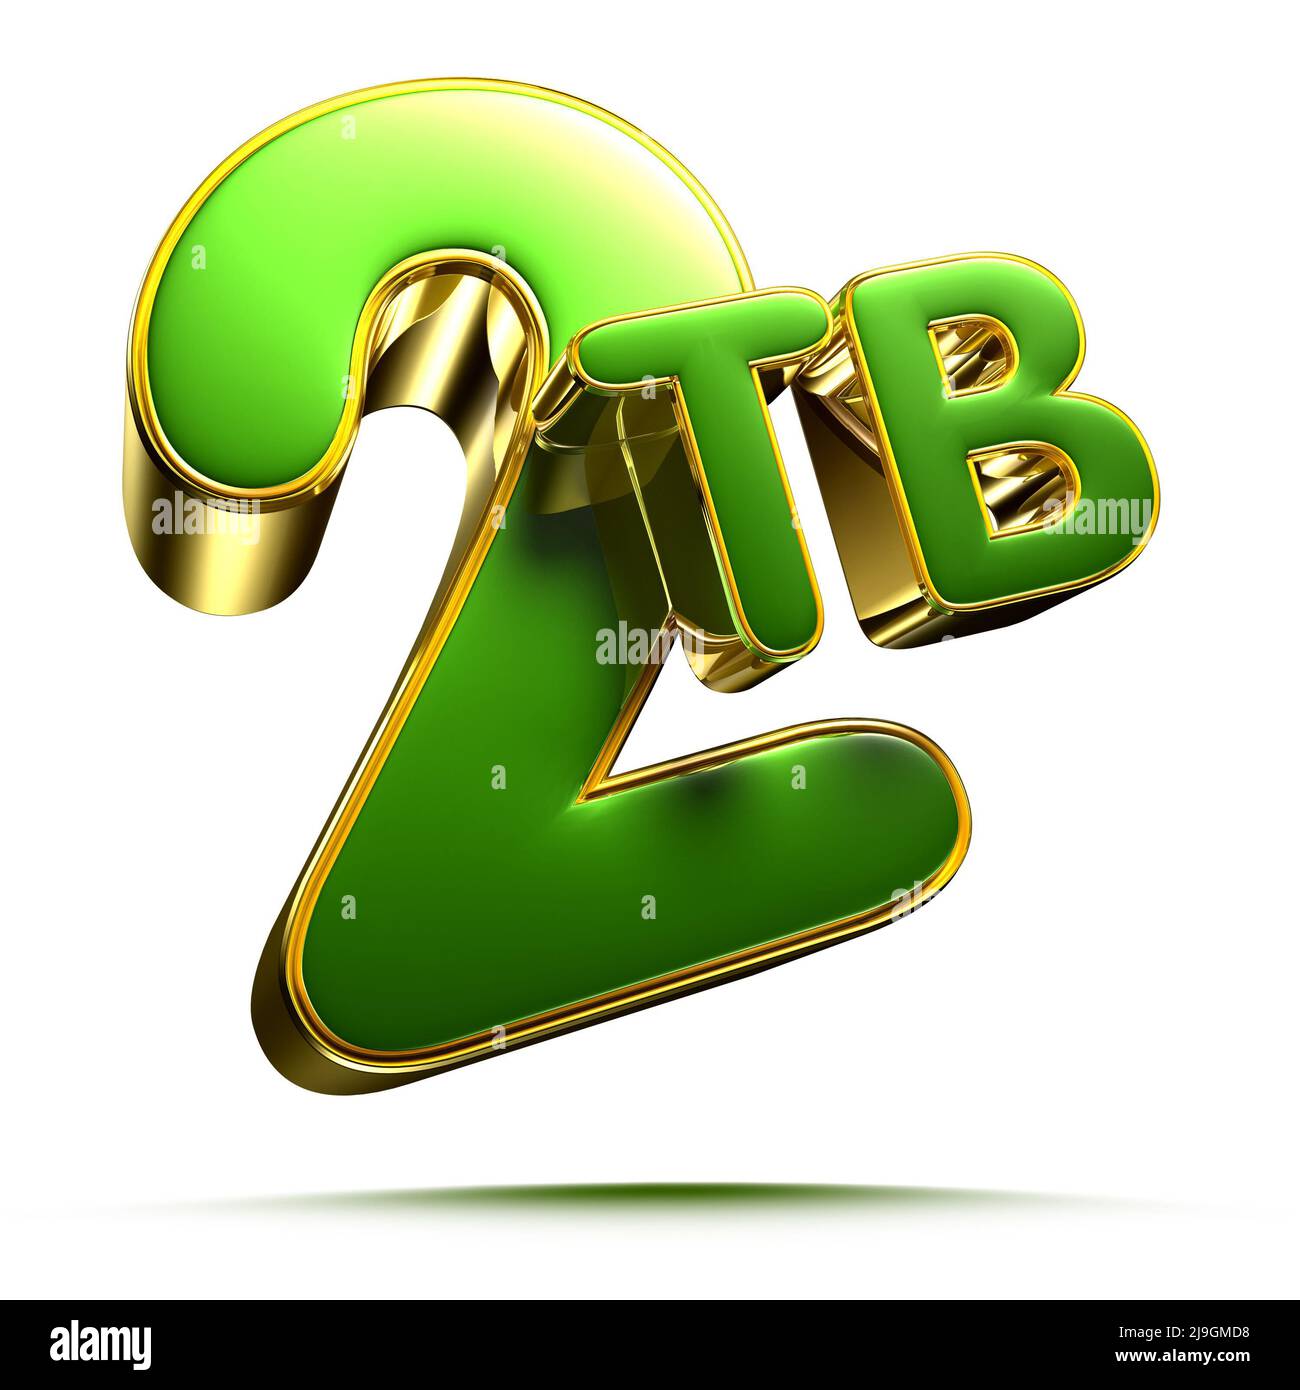 2 TB green with gold side borders 3D illustration on white background have work path. Stock Photo